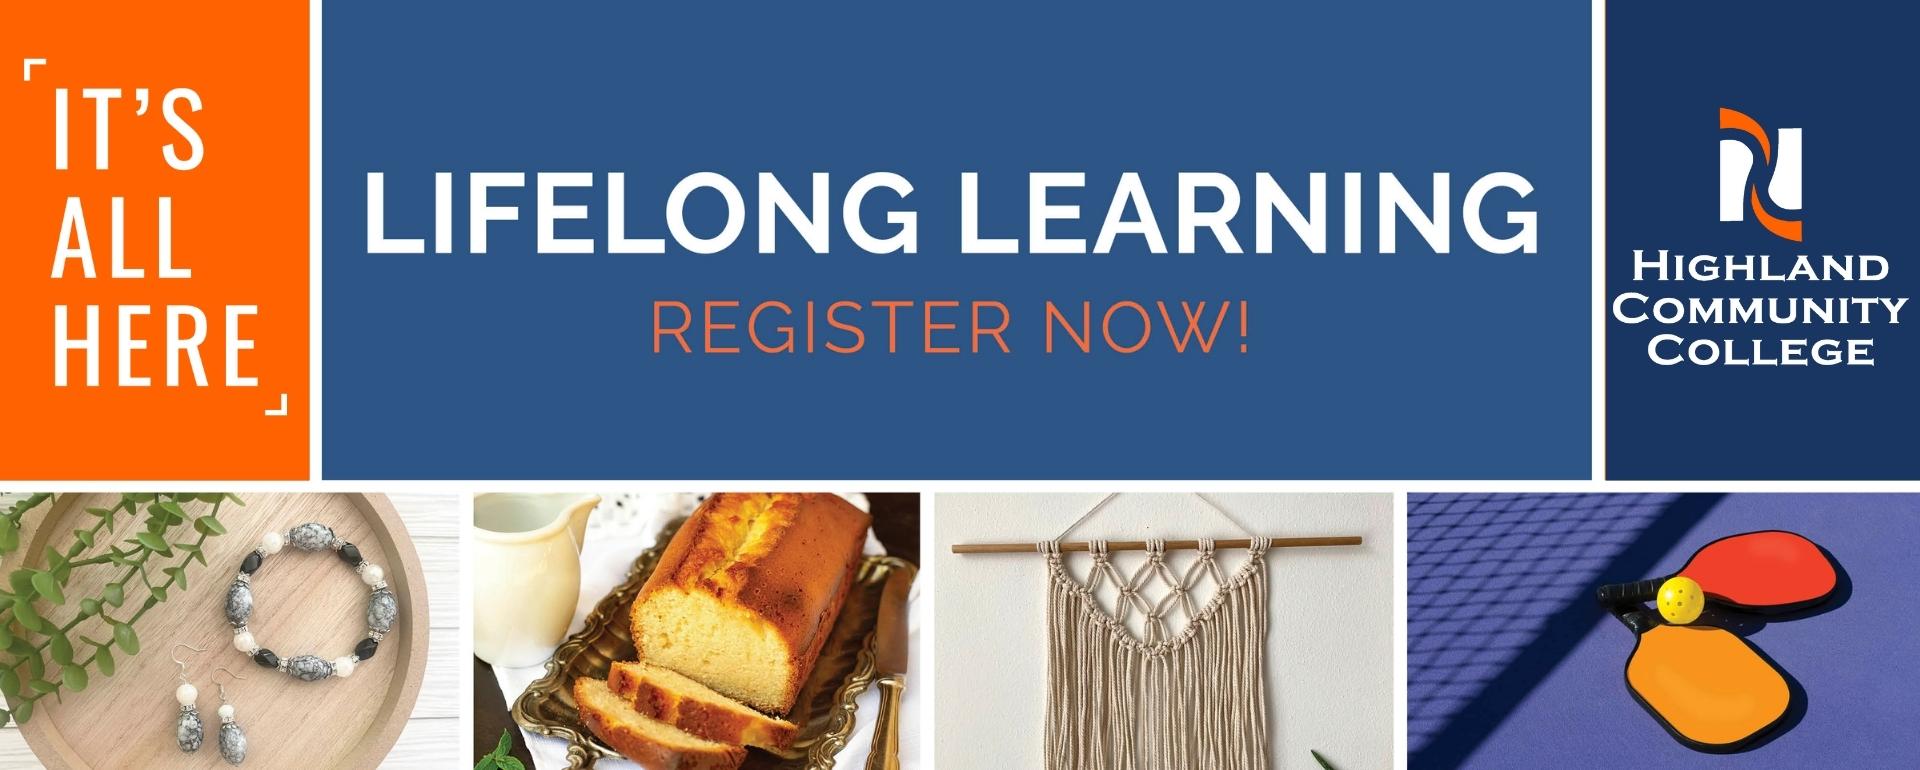 click to register now for fall lifelong learning classes